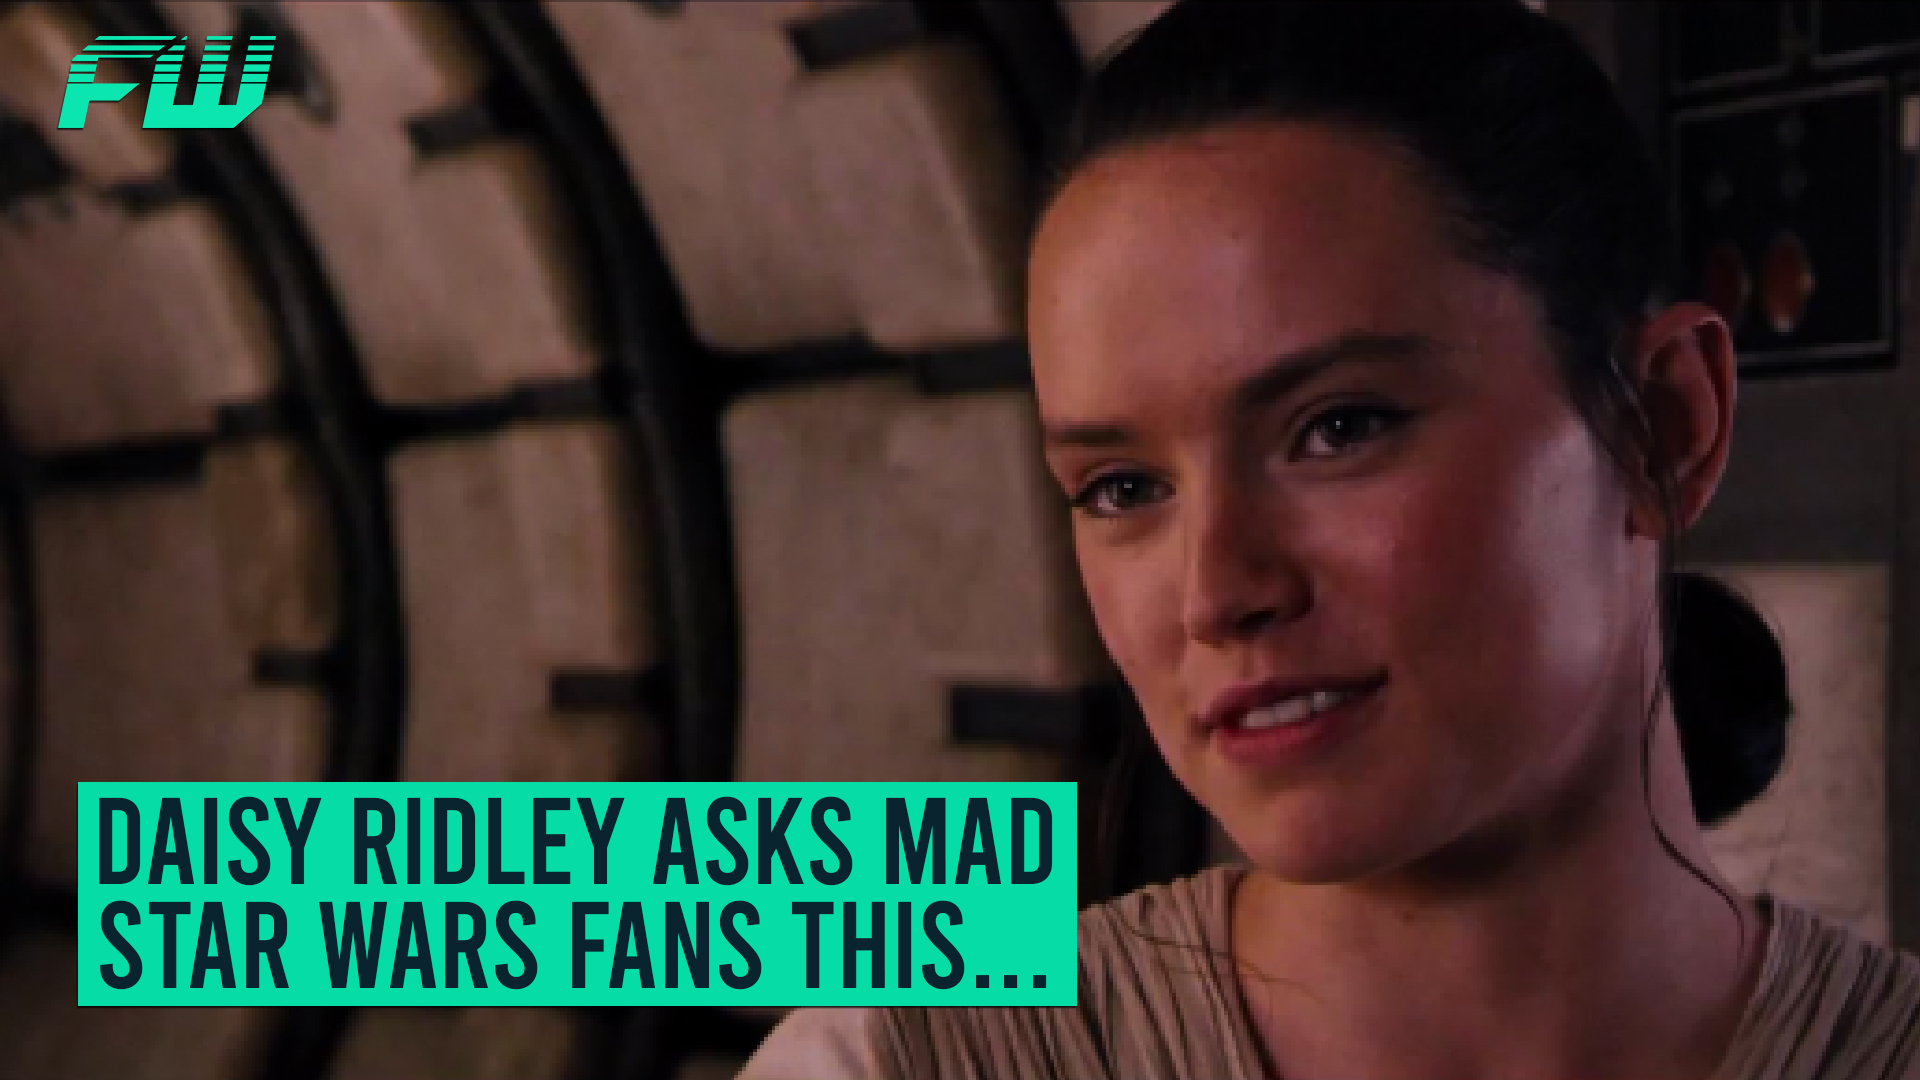 Daisy Ridley Asks Mad Star Wars Fans This...